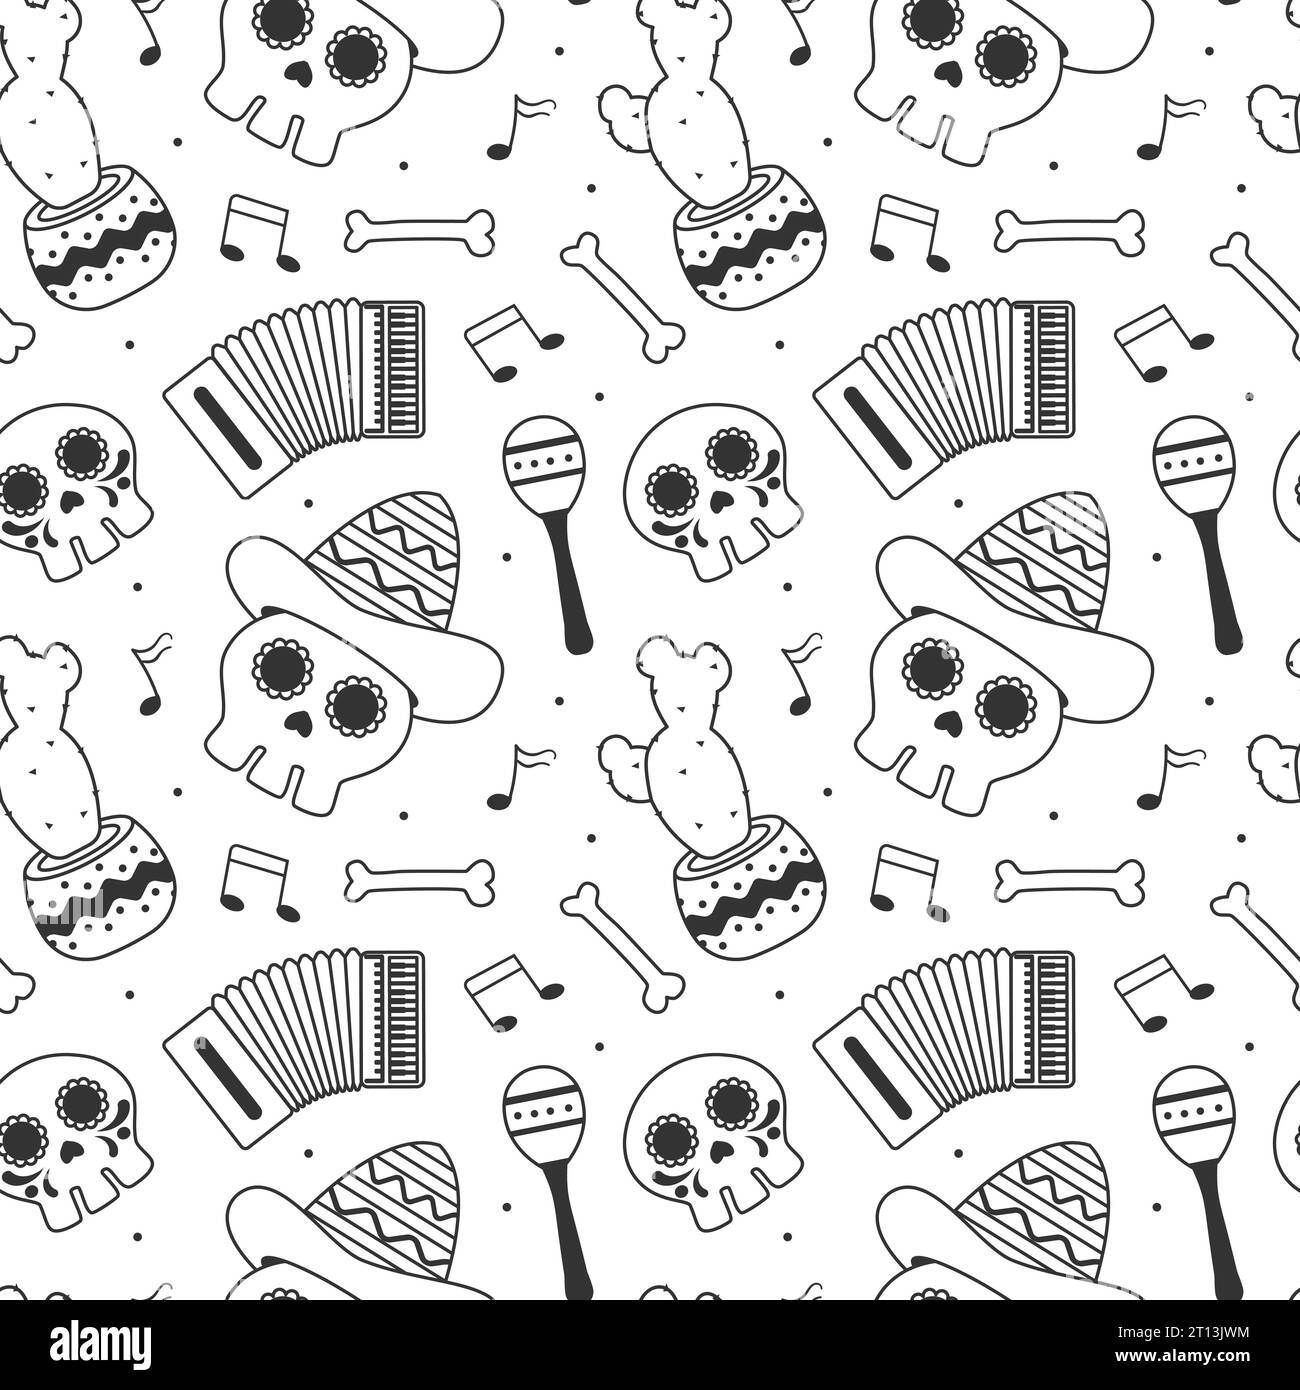 Dia de Muertos Seamless Pattern Illustration with Day of the Dead and Skeleton Element in Mexican Design Stock Vector